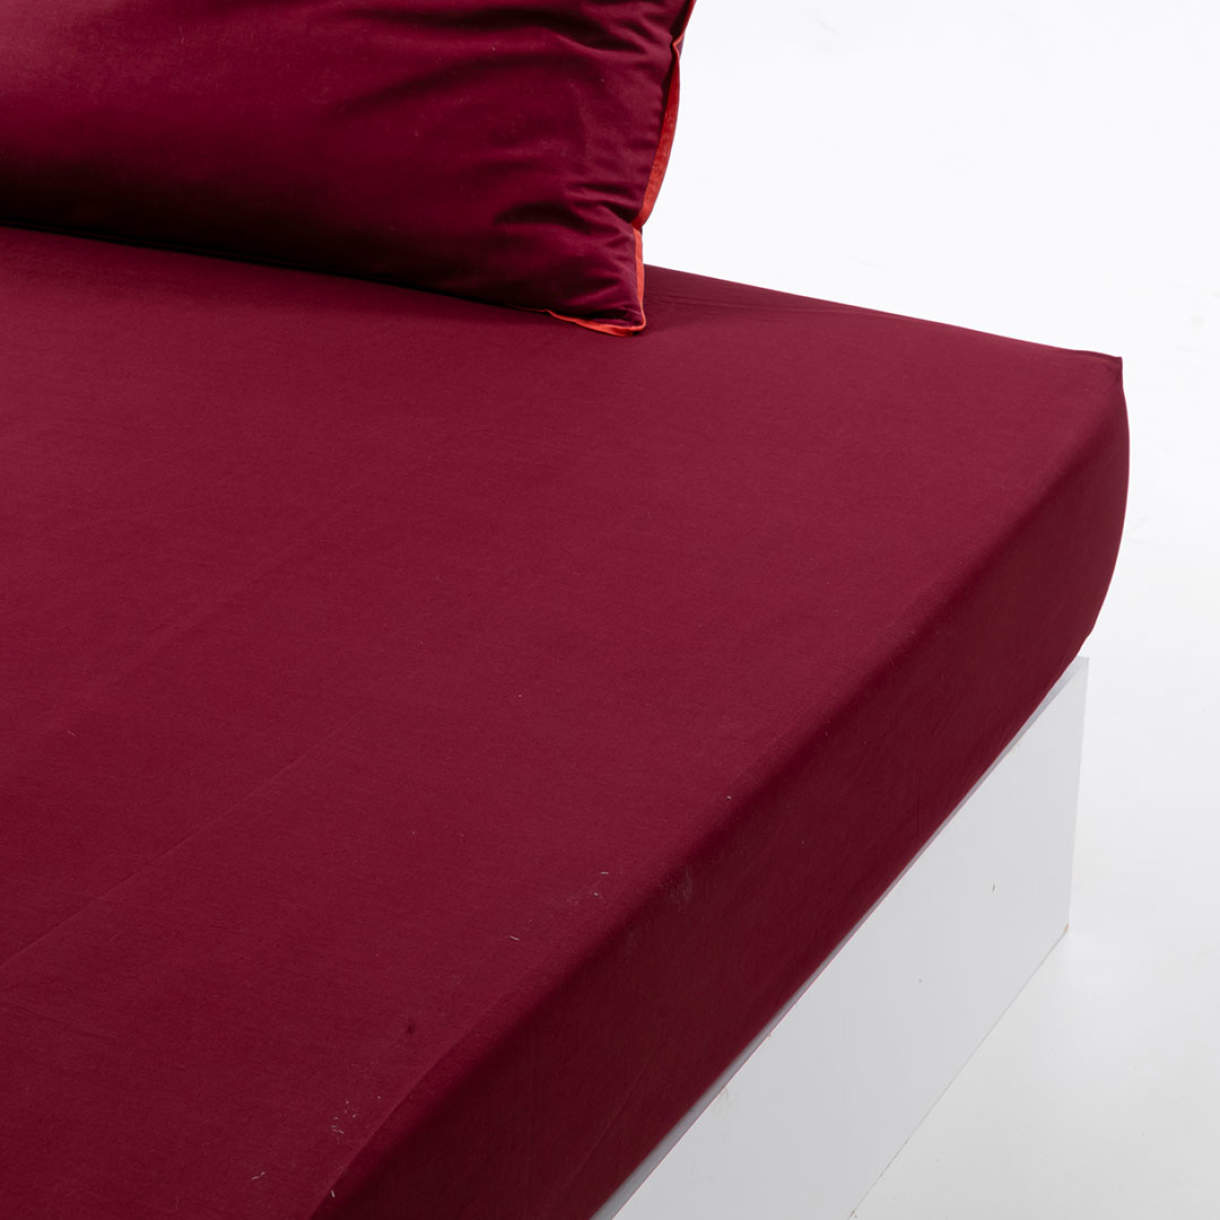 King Size Elastic Bamboo Aloe Vera Bed Sheet 180x200 cm Claret Red